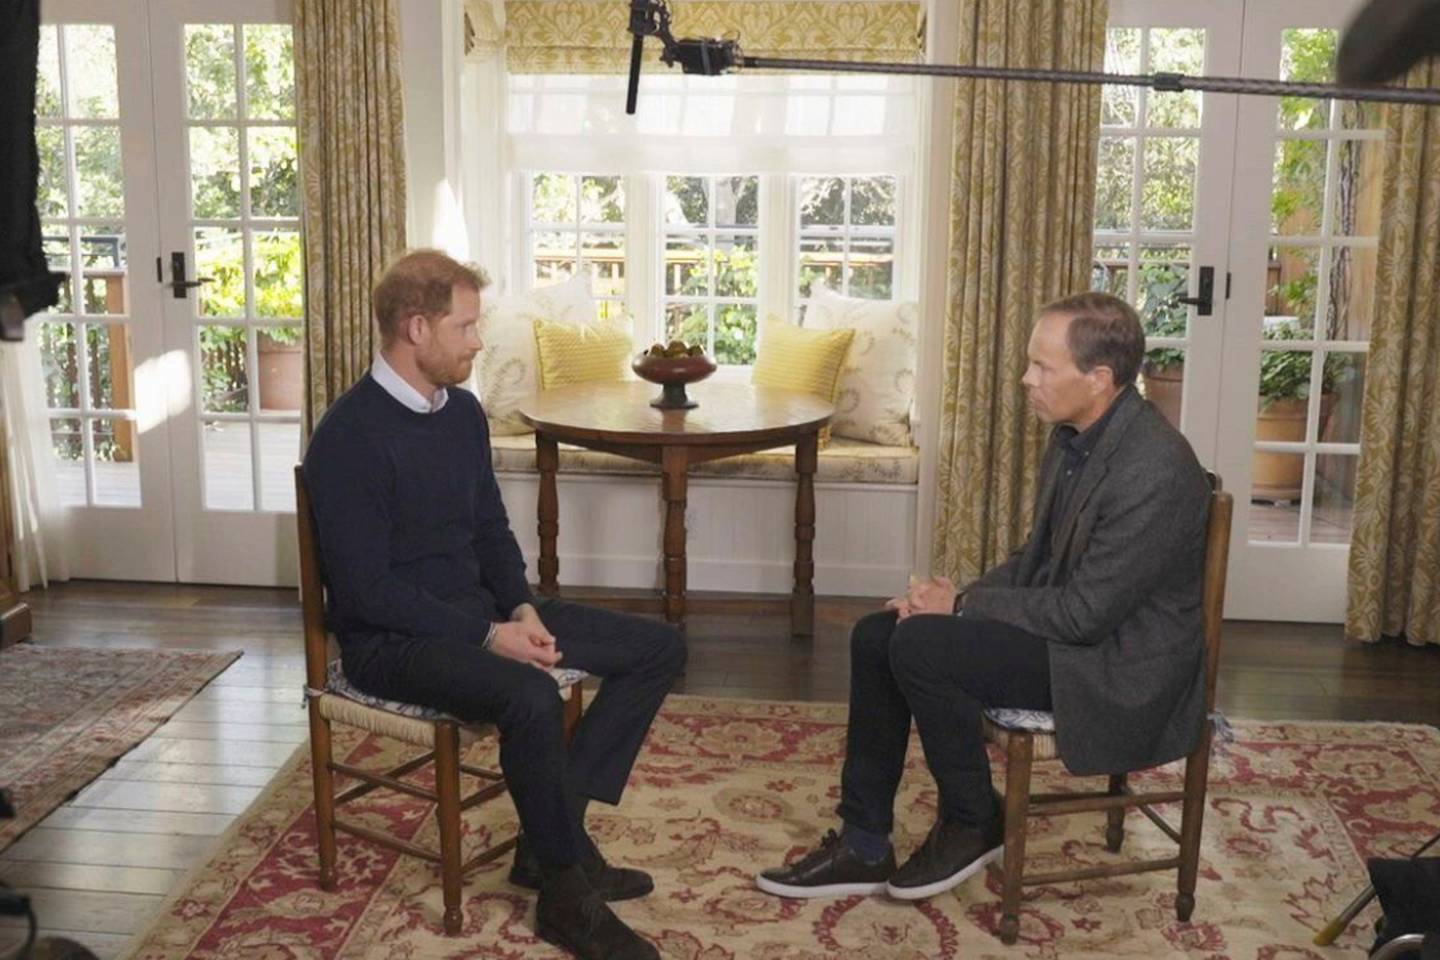 Prince Harry defends his explosive memoirs in new book